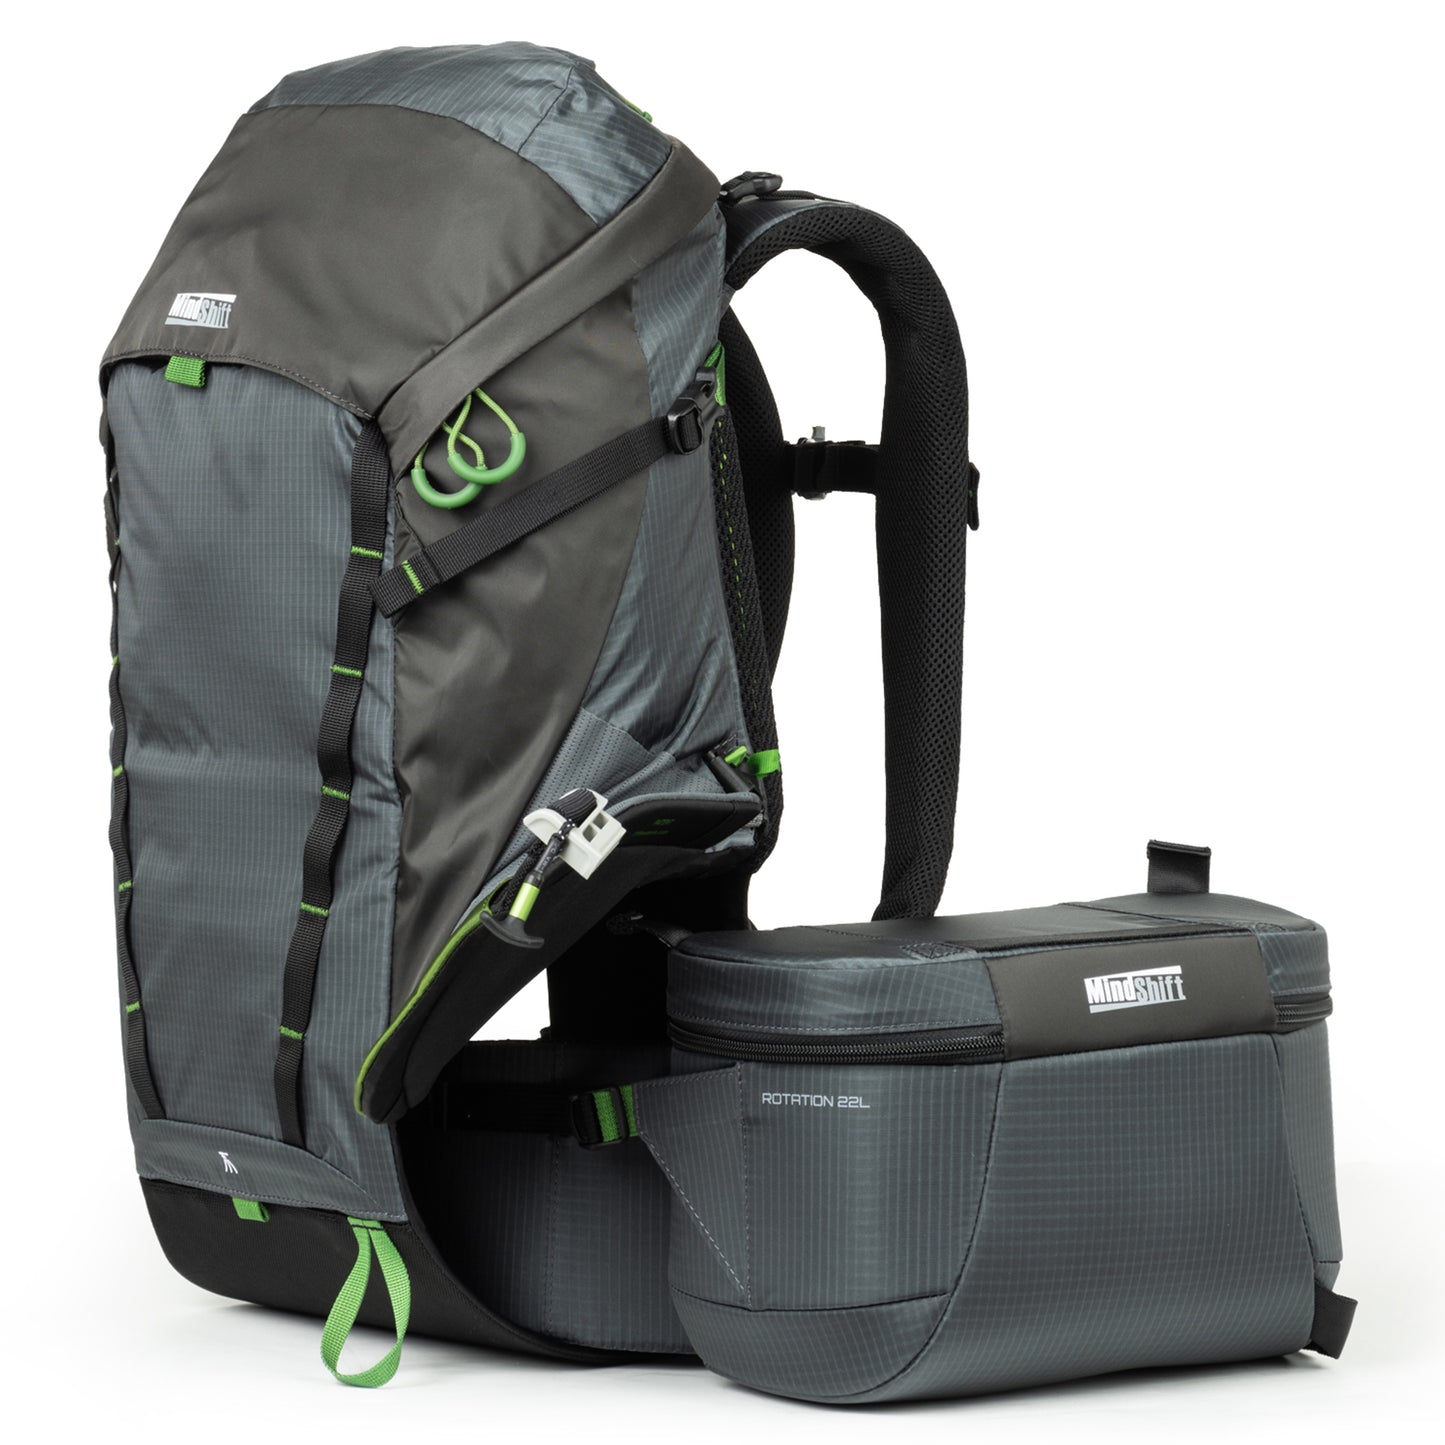 Simply rotate the integrated belt pack to the front of your body and your camera is at your fingertips. 